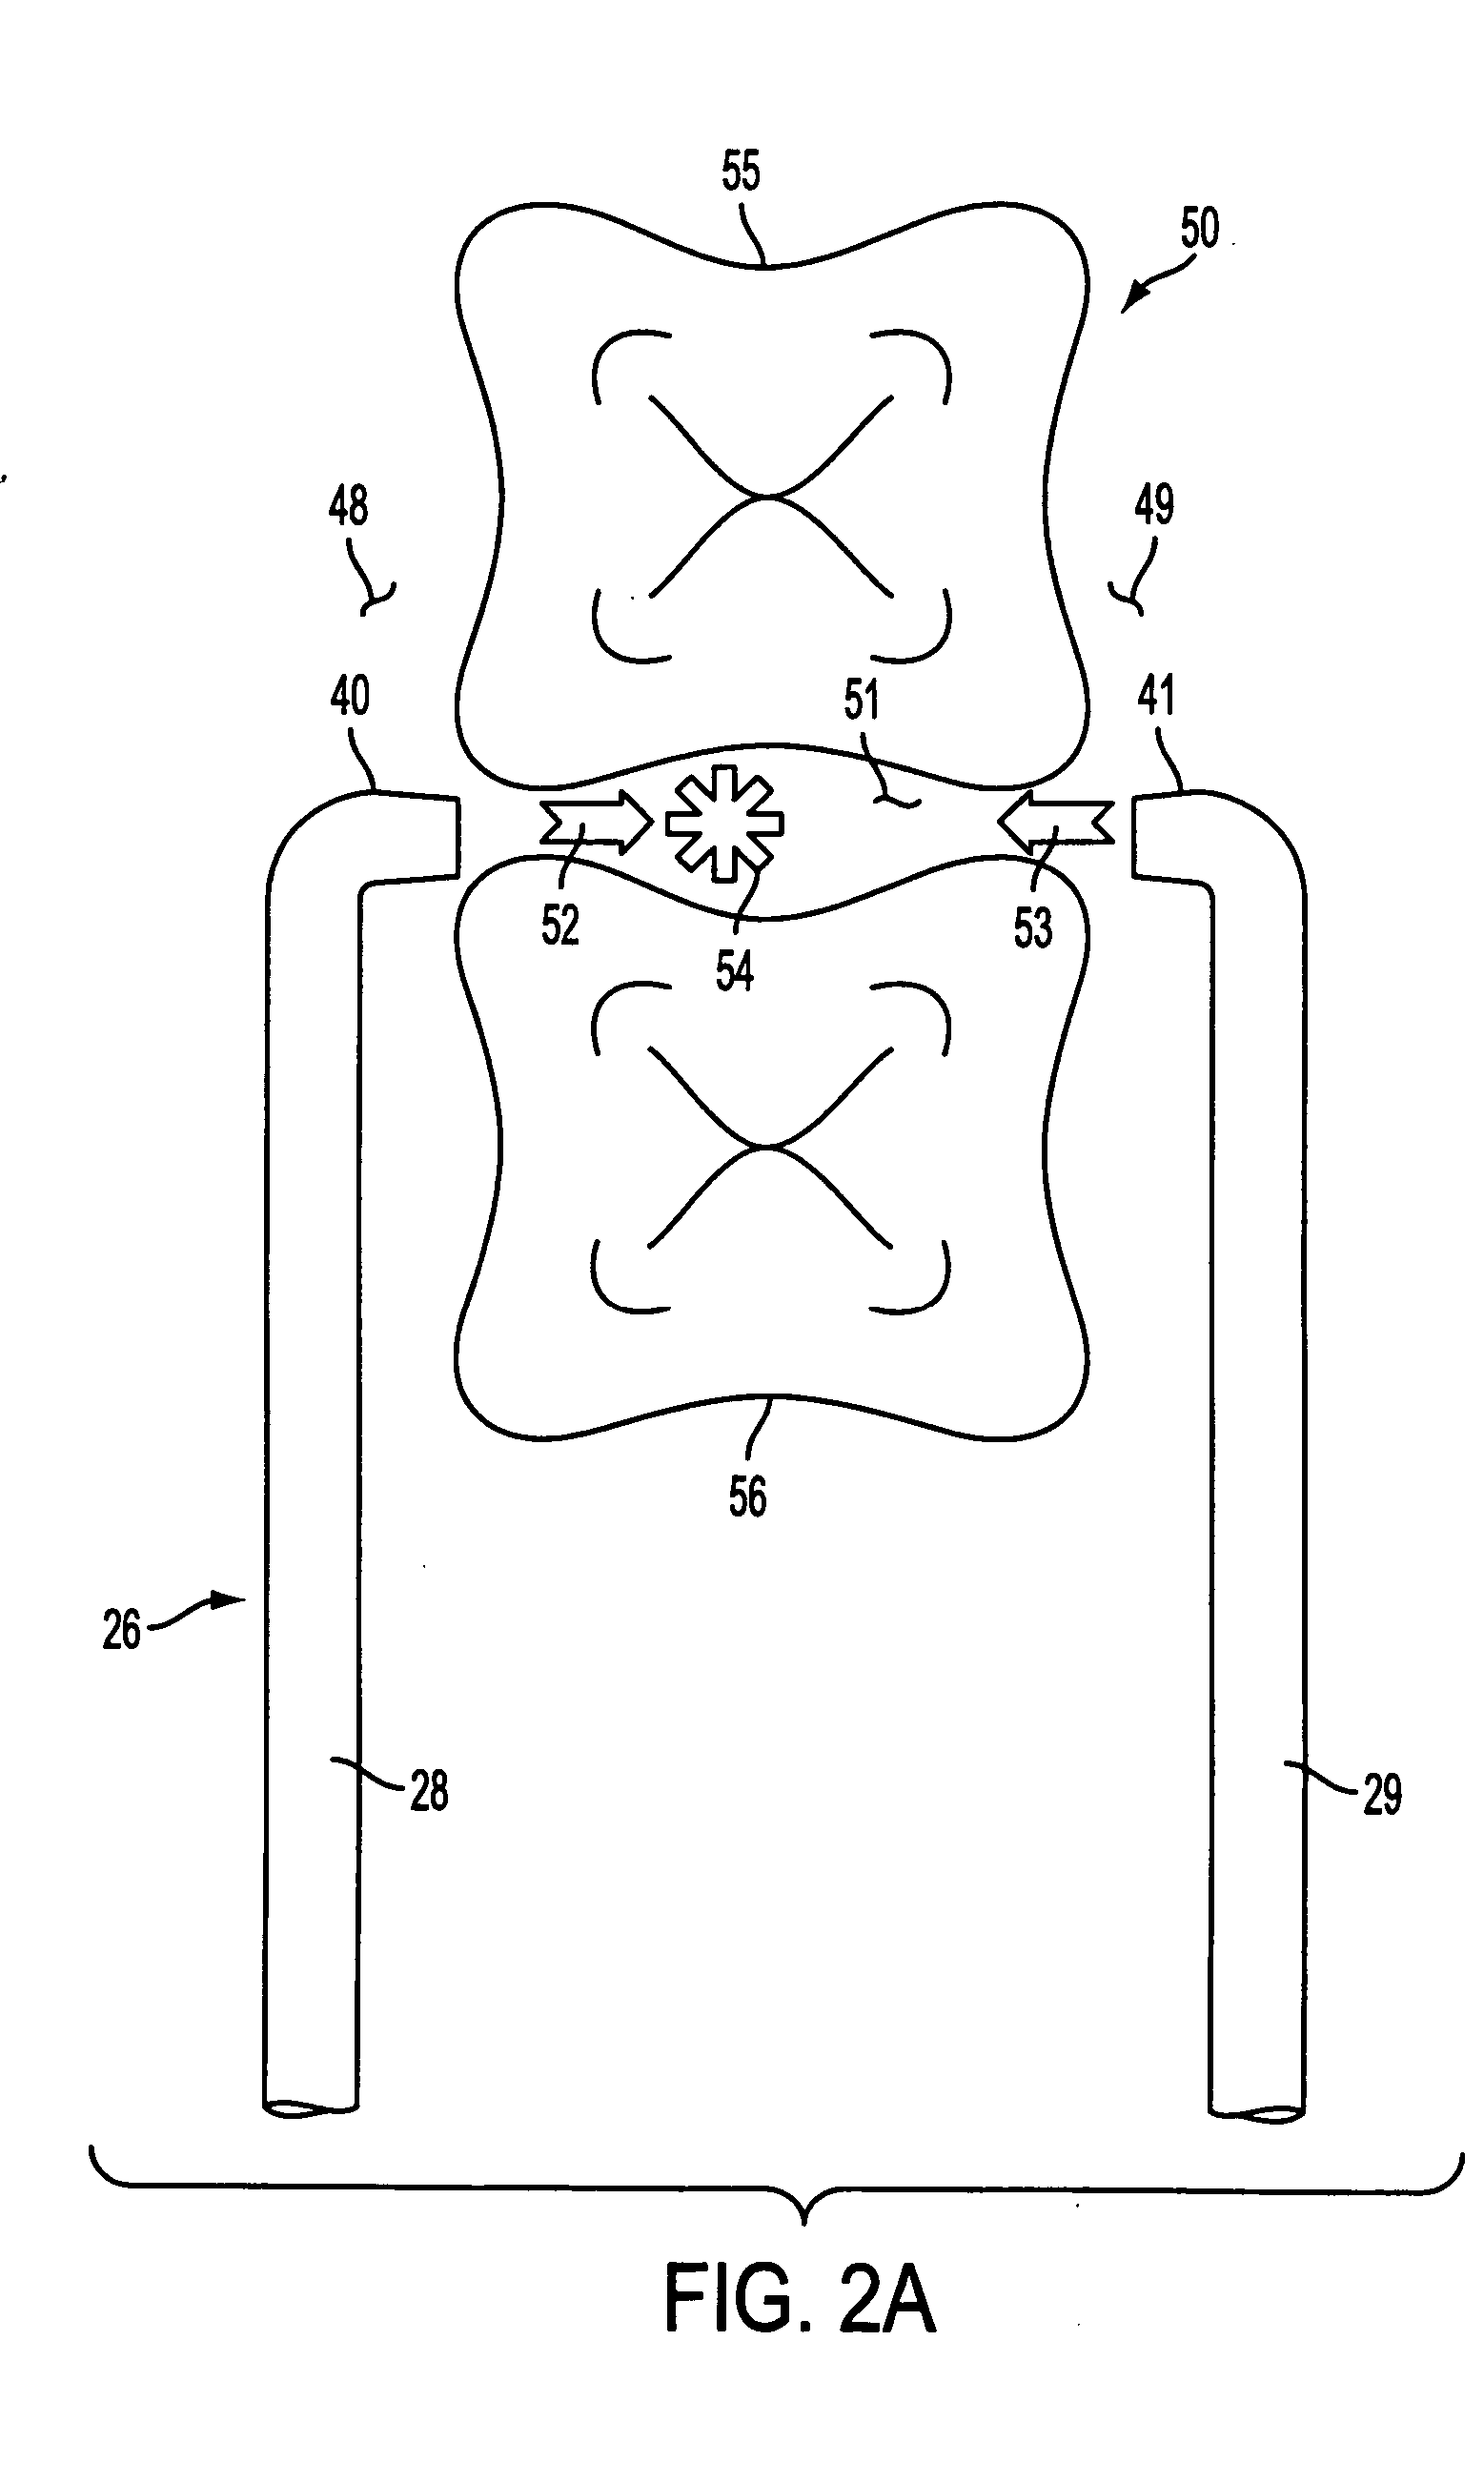 Oral irrigation and/or brushing devices and/or methods